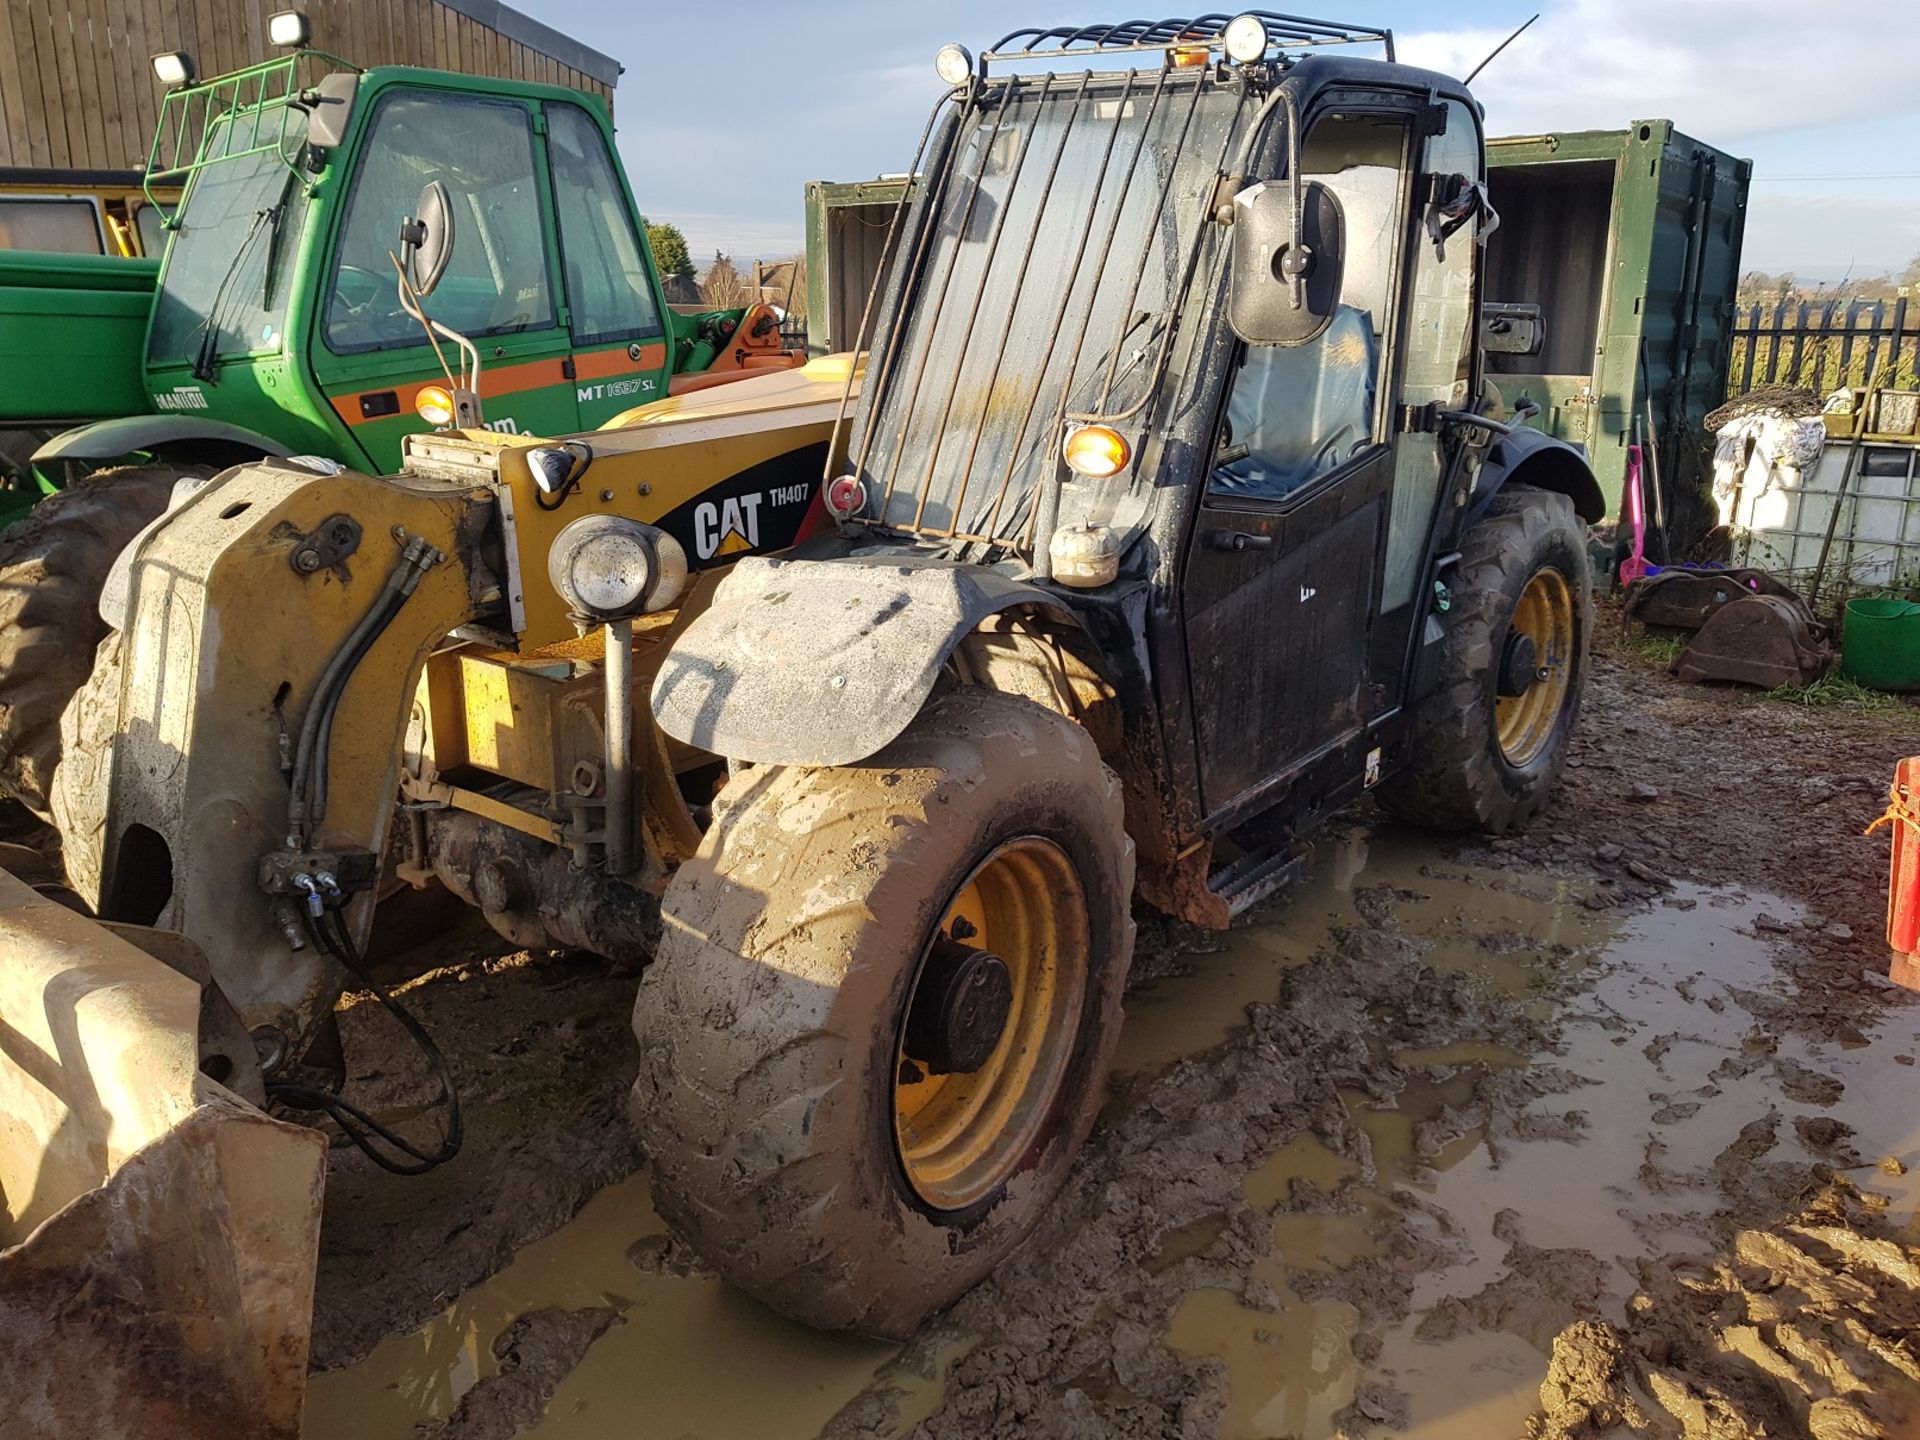 2009/58 REG CATERPILLAR TELEHANDLER TH407 WITH BUCKET & FORKS, SHOWING 8,485 HOURS (UNVERIFIED) - Image 2 of 8